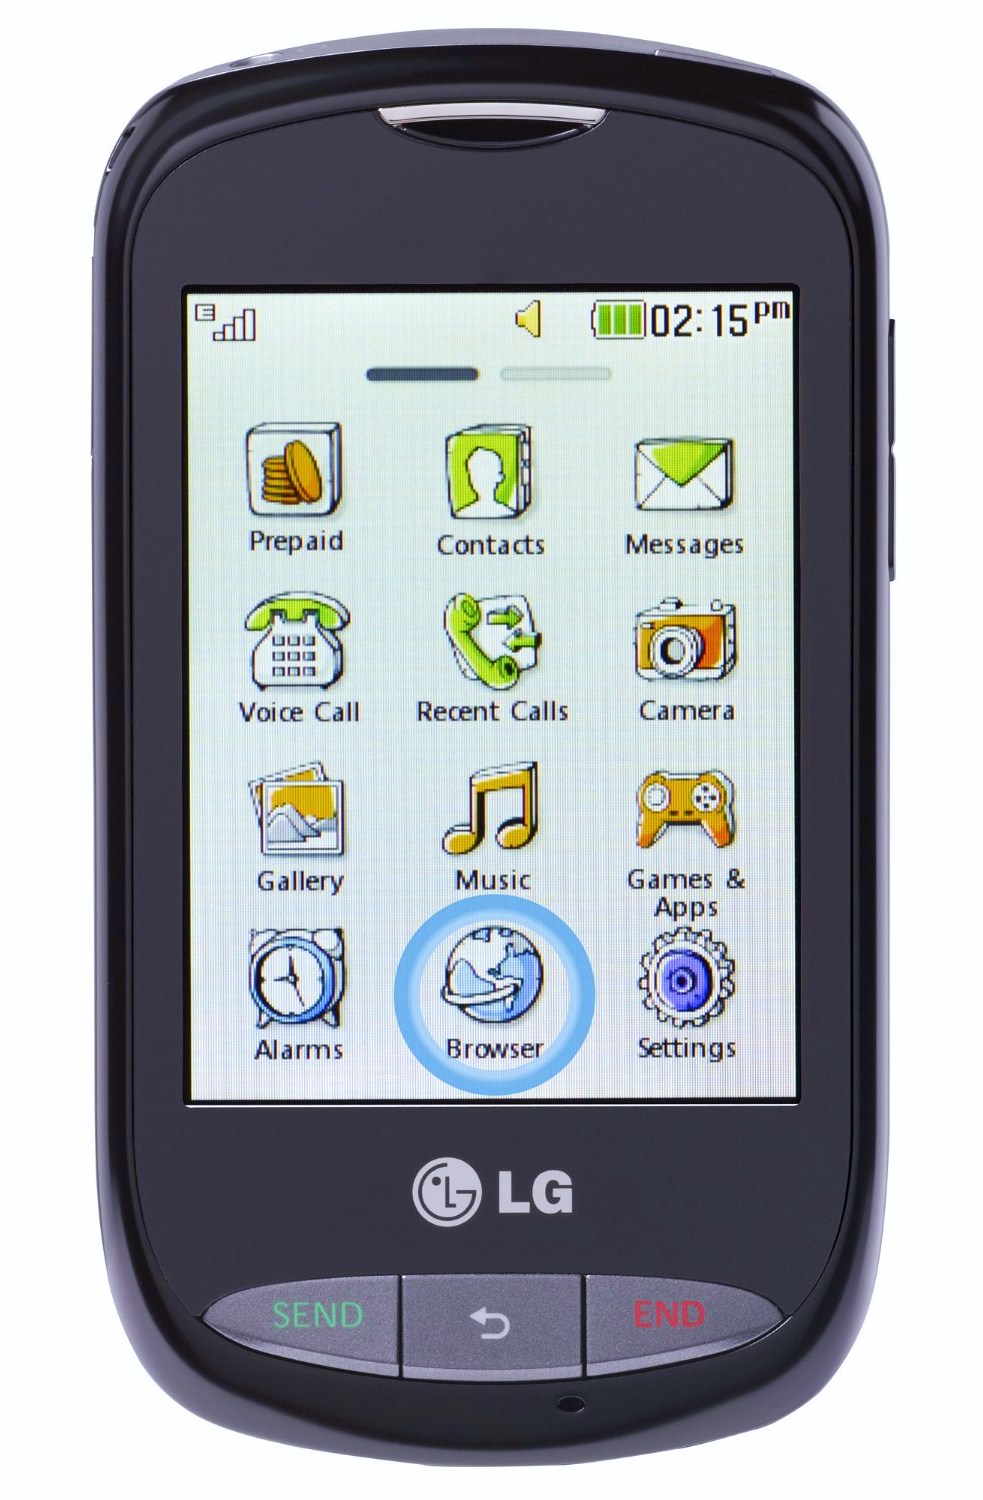 TracfoneReviewer: LG 840G Vs LG 800G Tracfone Comparison